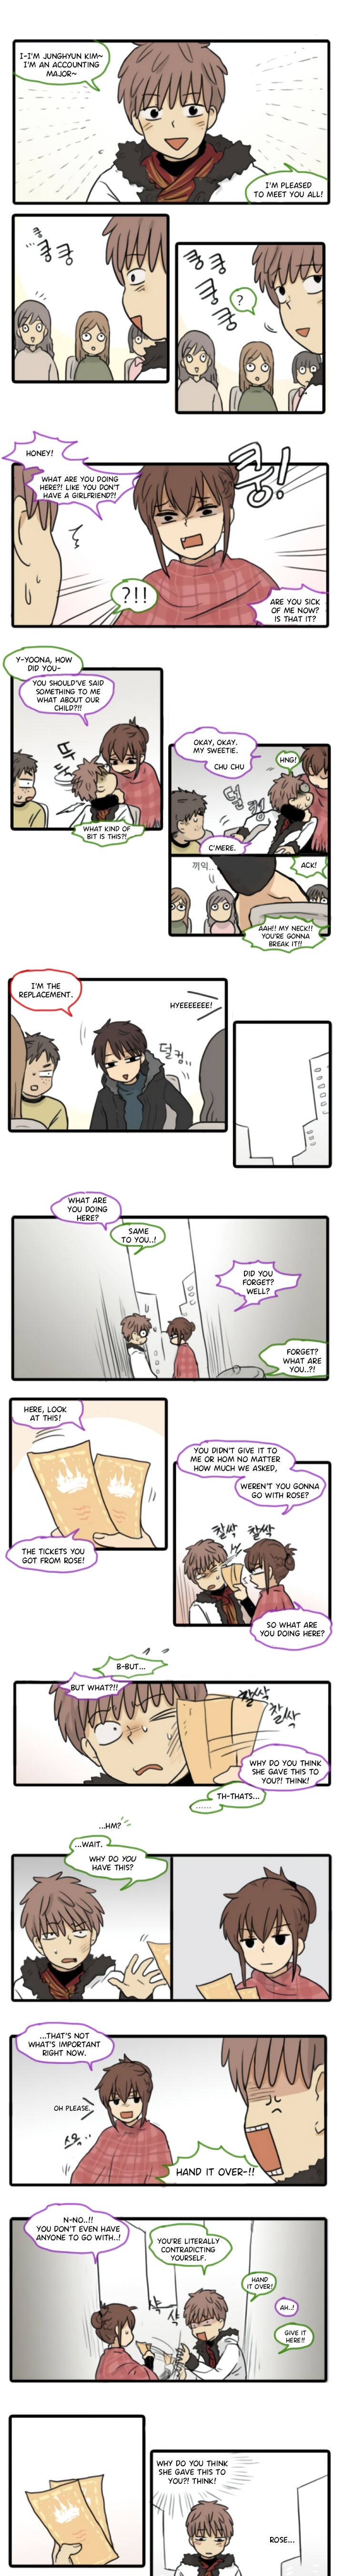 Welcome To Room 305 Chapter 150 Page 2